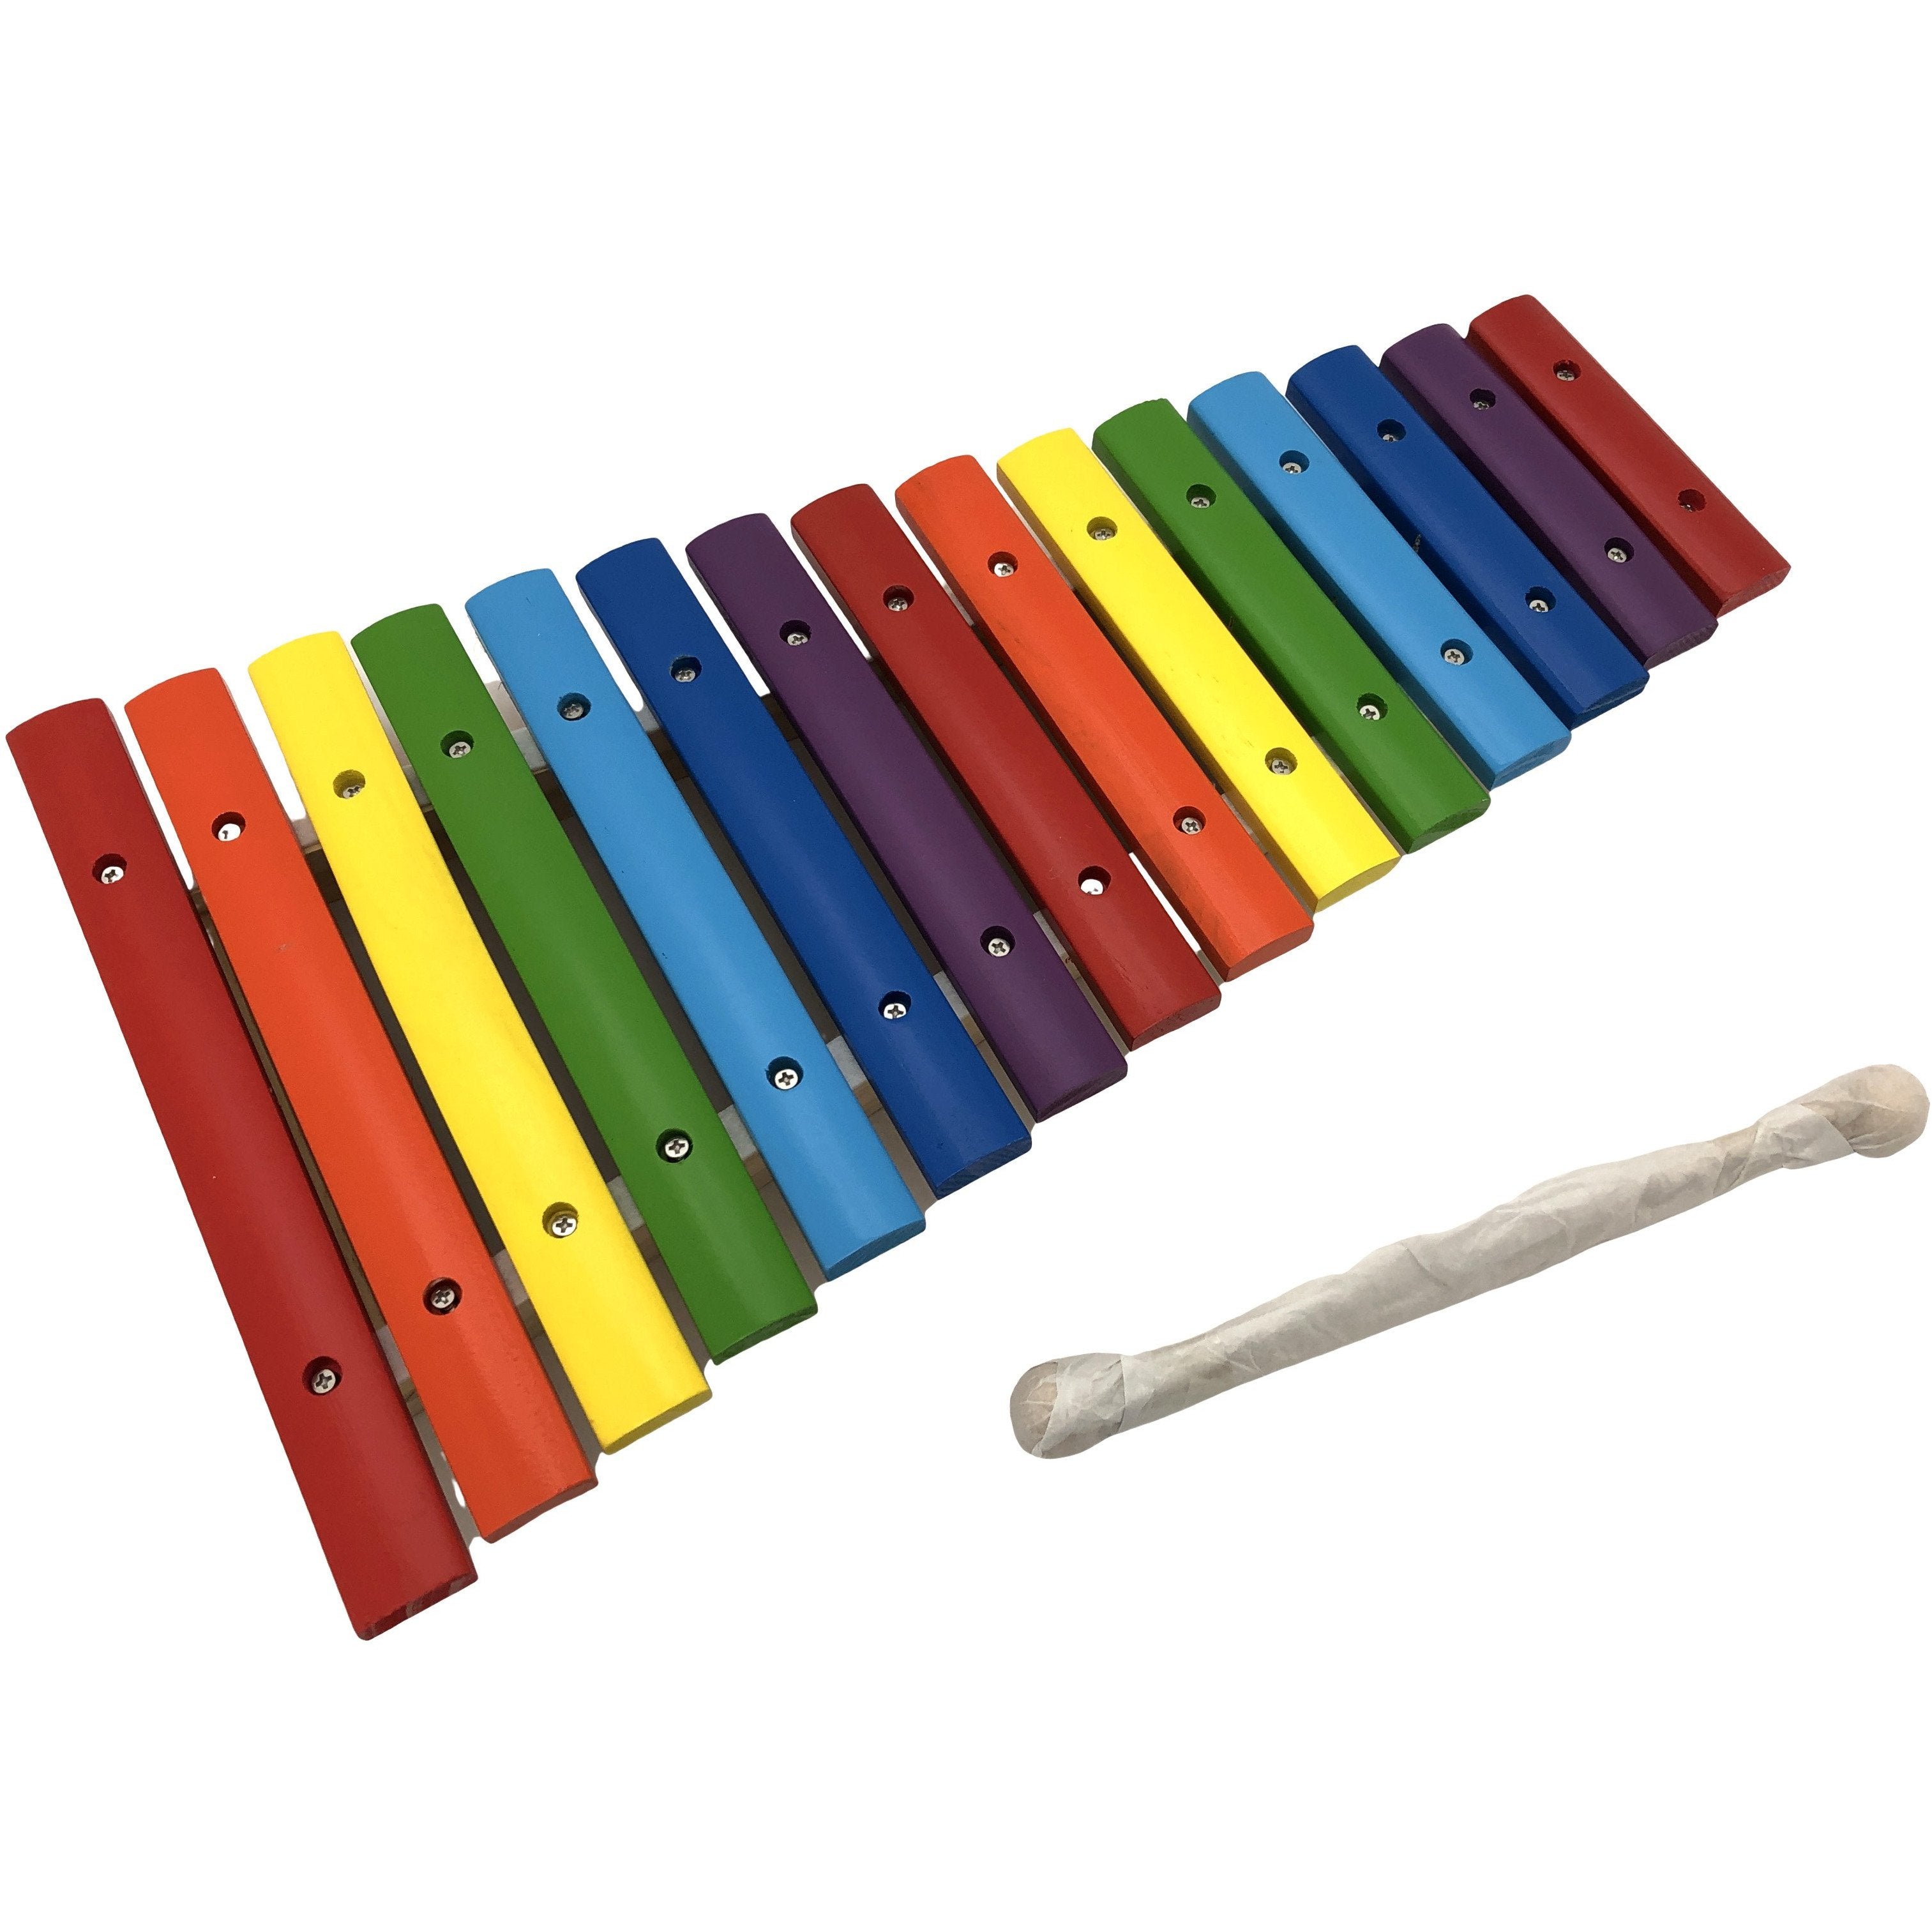 Tooky Toy Xylophone Toy: Wooden Toy